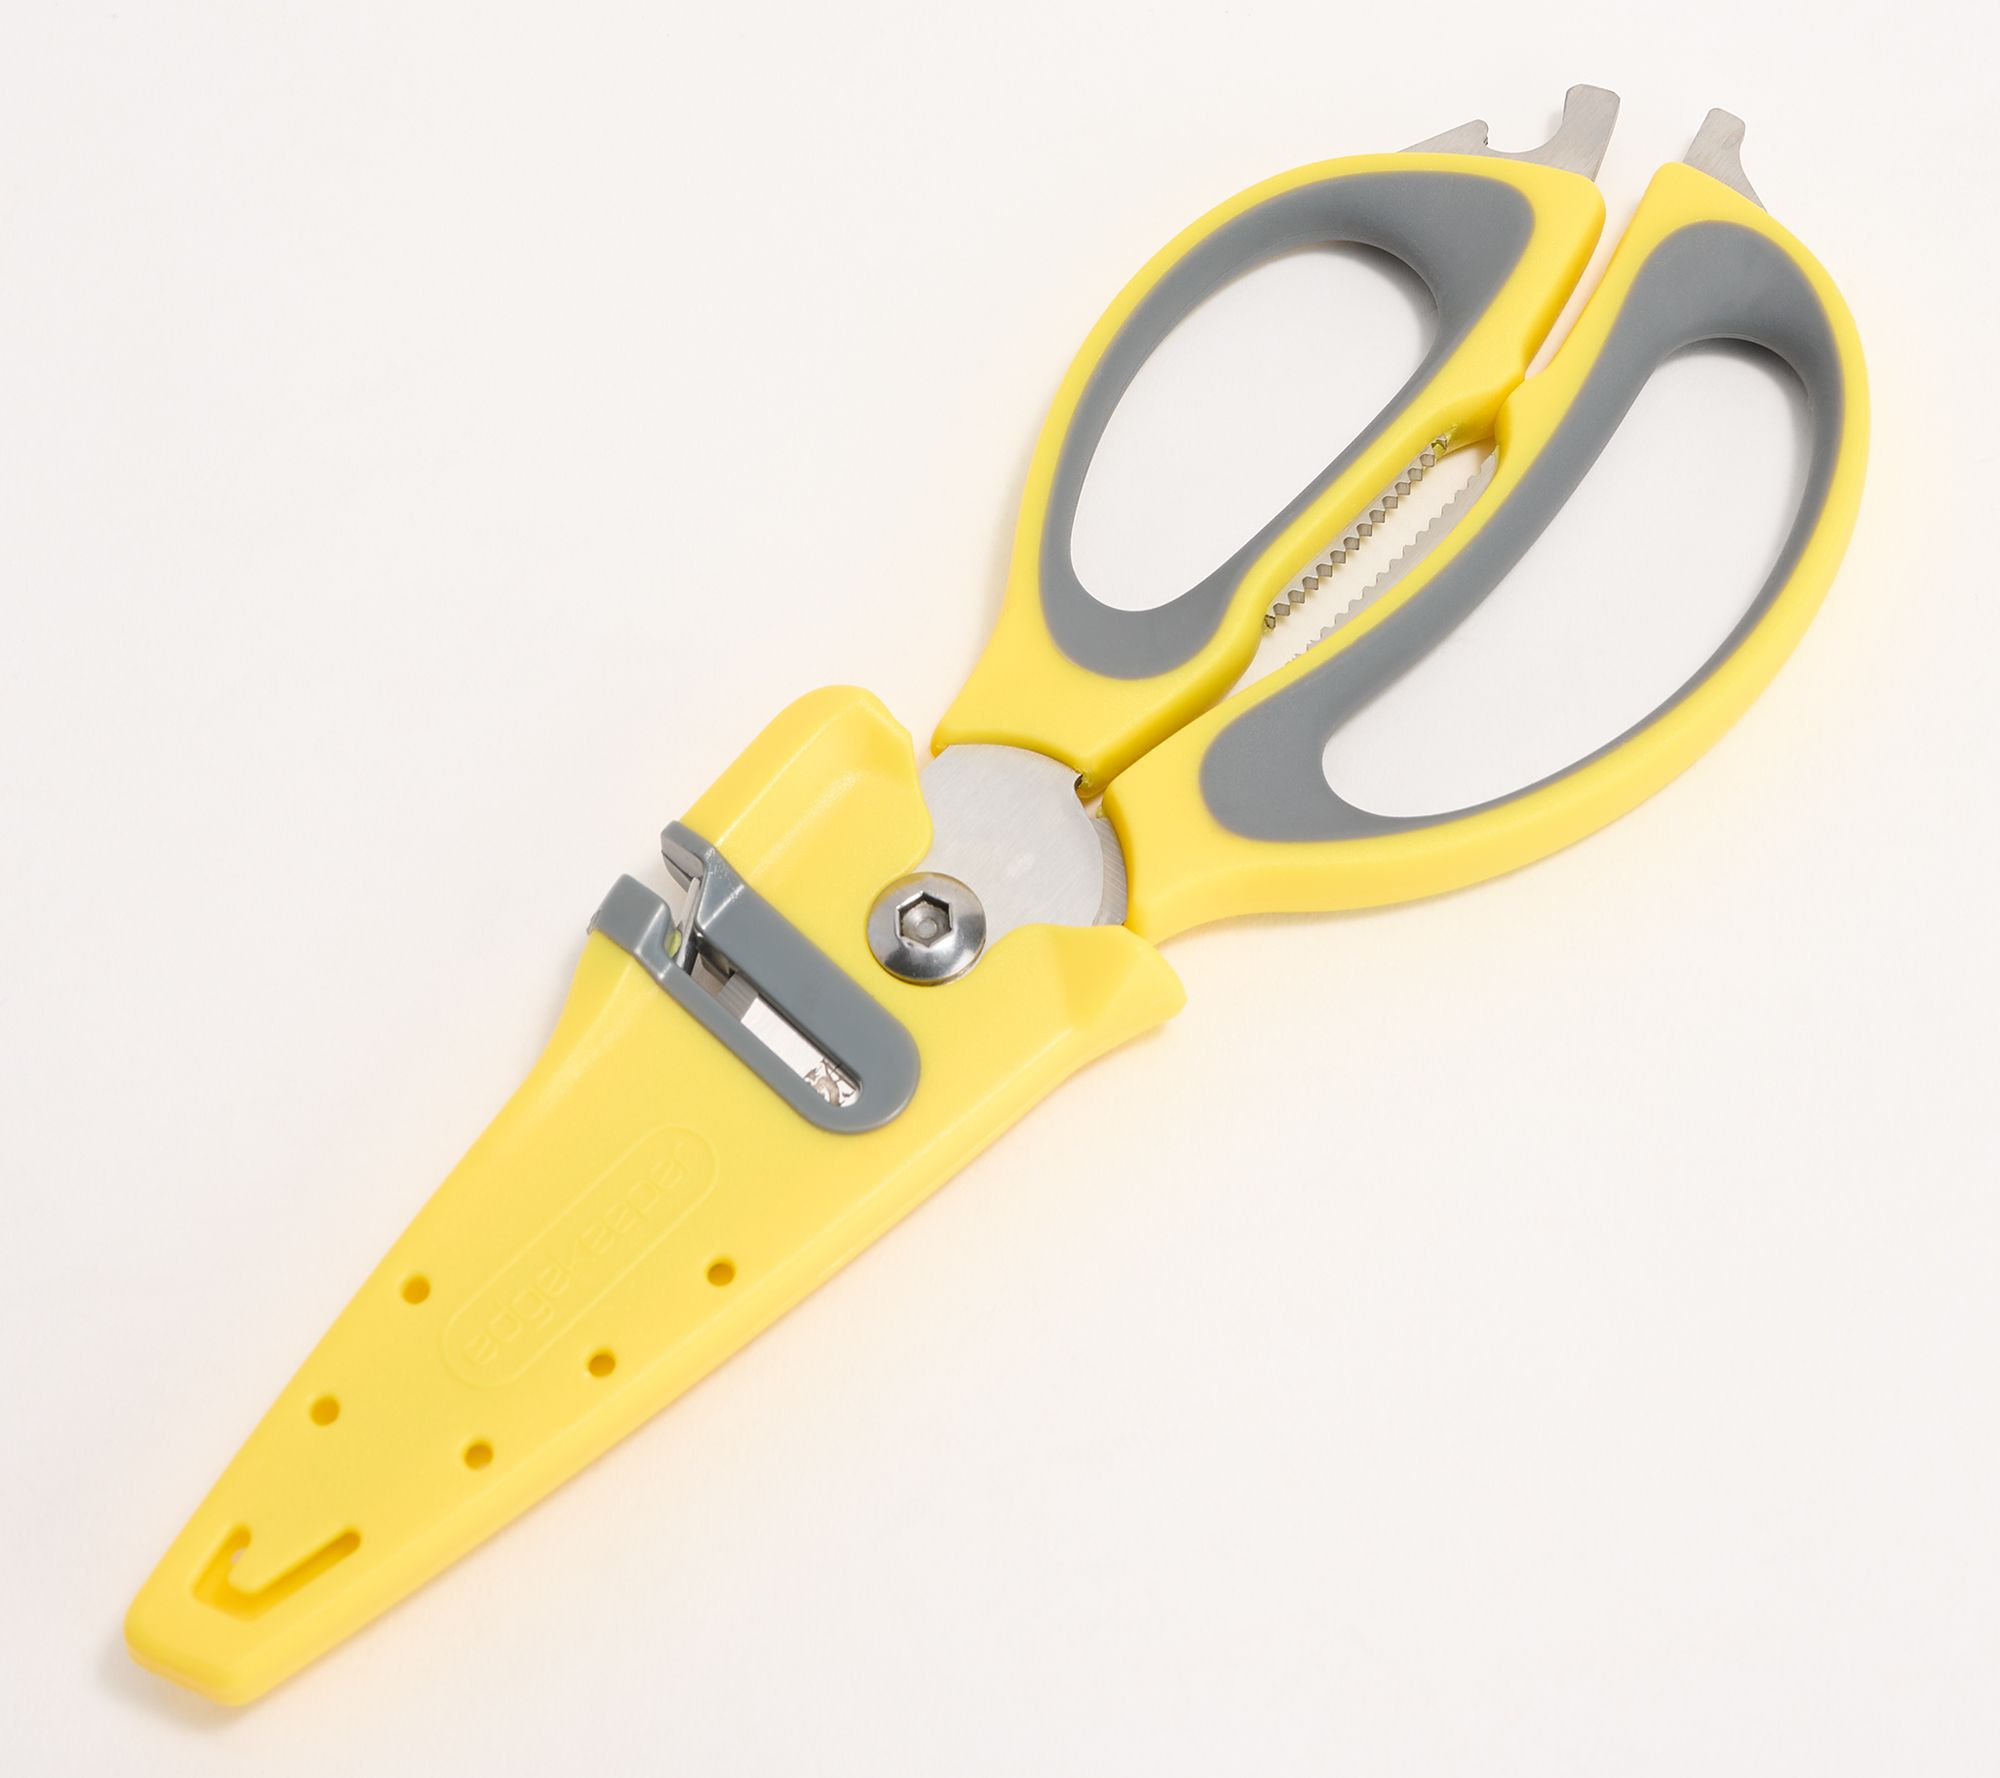 Sabatier 5-in-1 Multi-Purpose Soft-Grip Scissors with an Edgekeeper  Built-In Sharpener Blade Cover, All-in-1 Heavy-Duty Scissors with Flathead